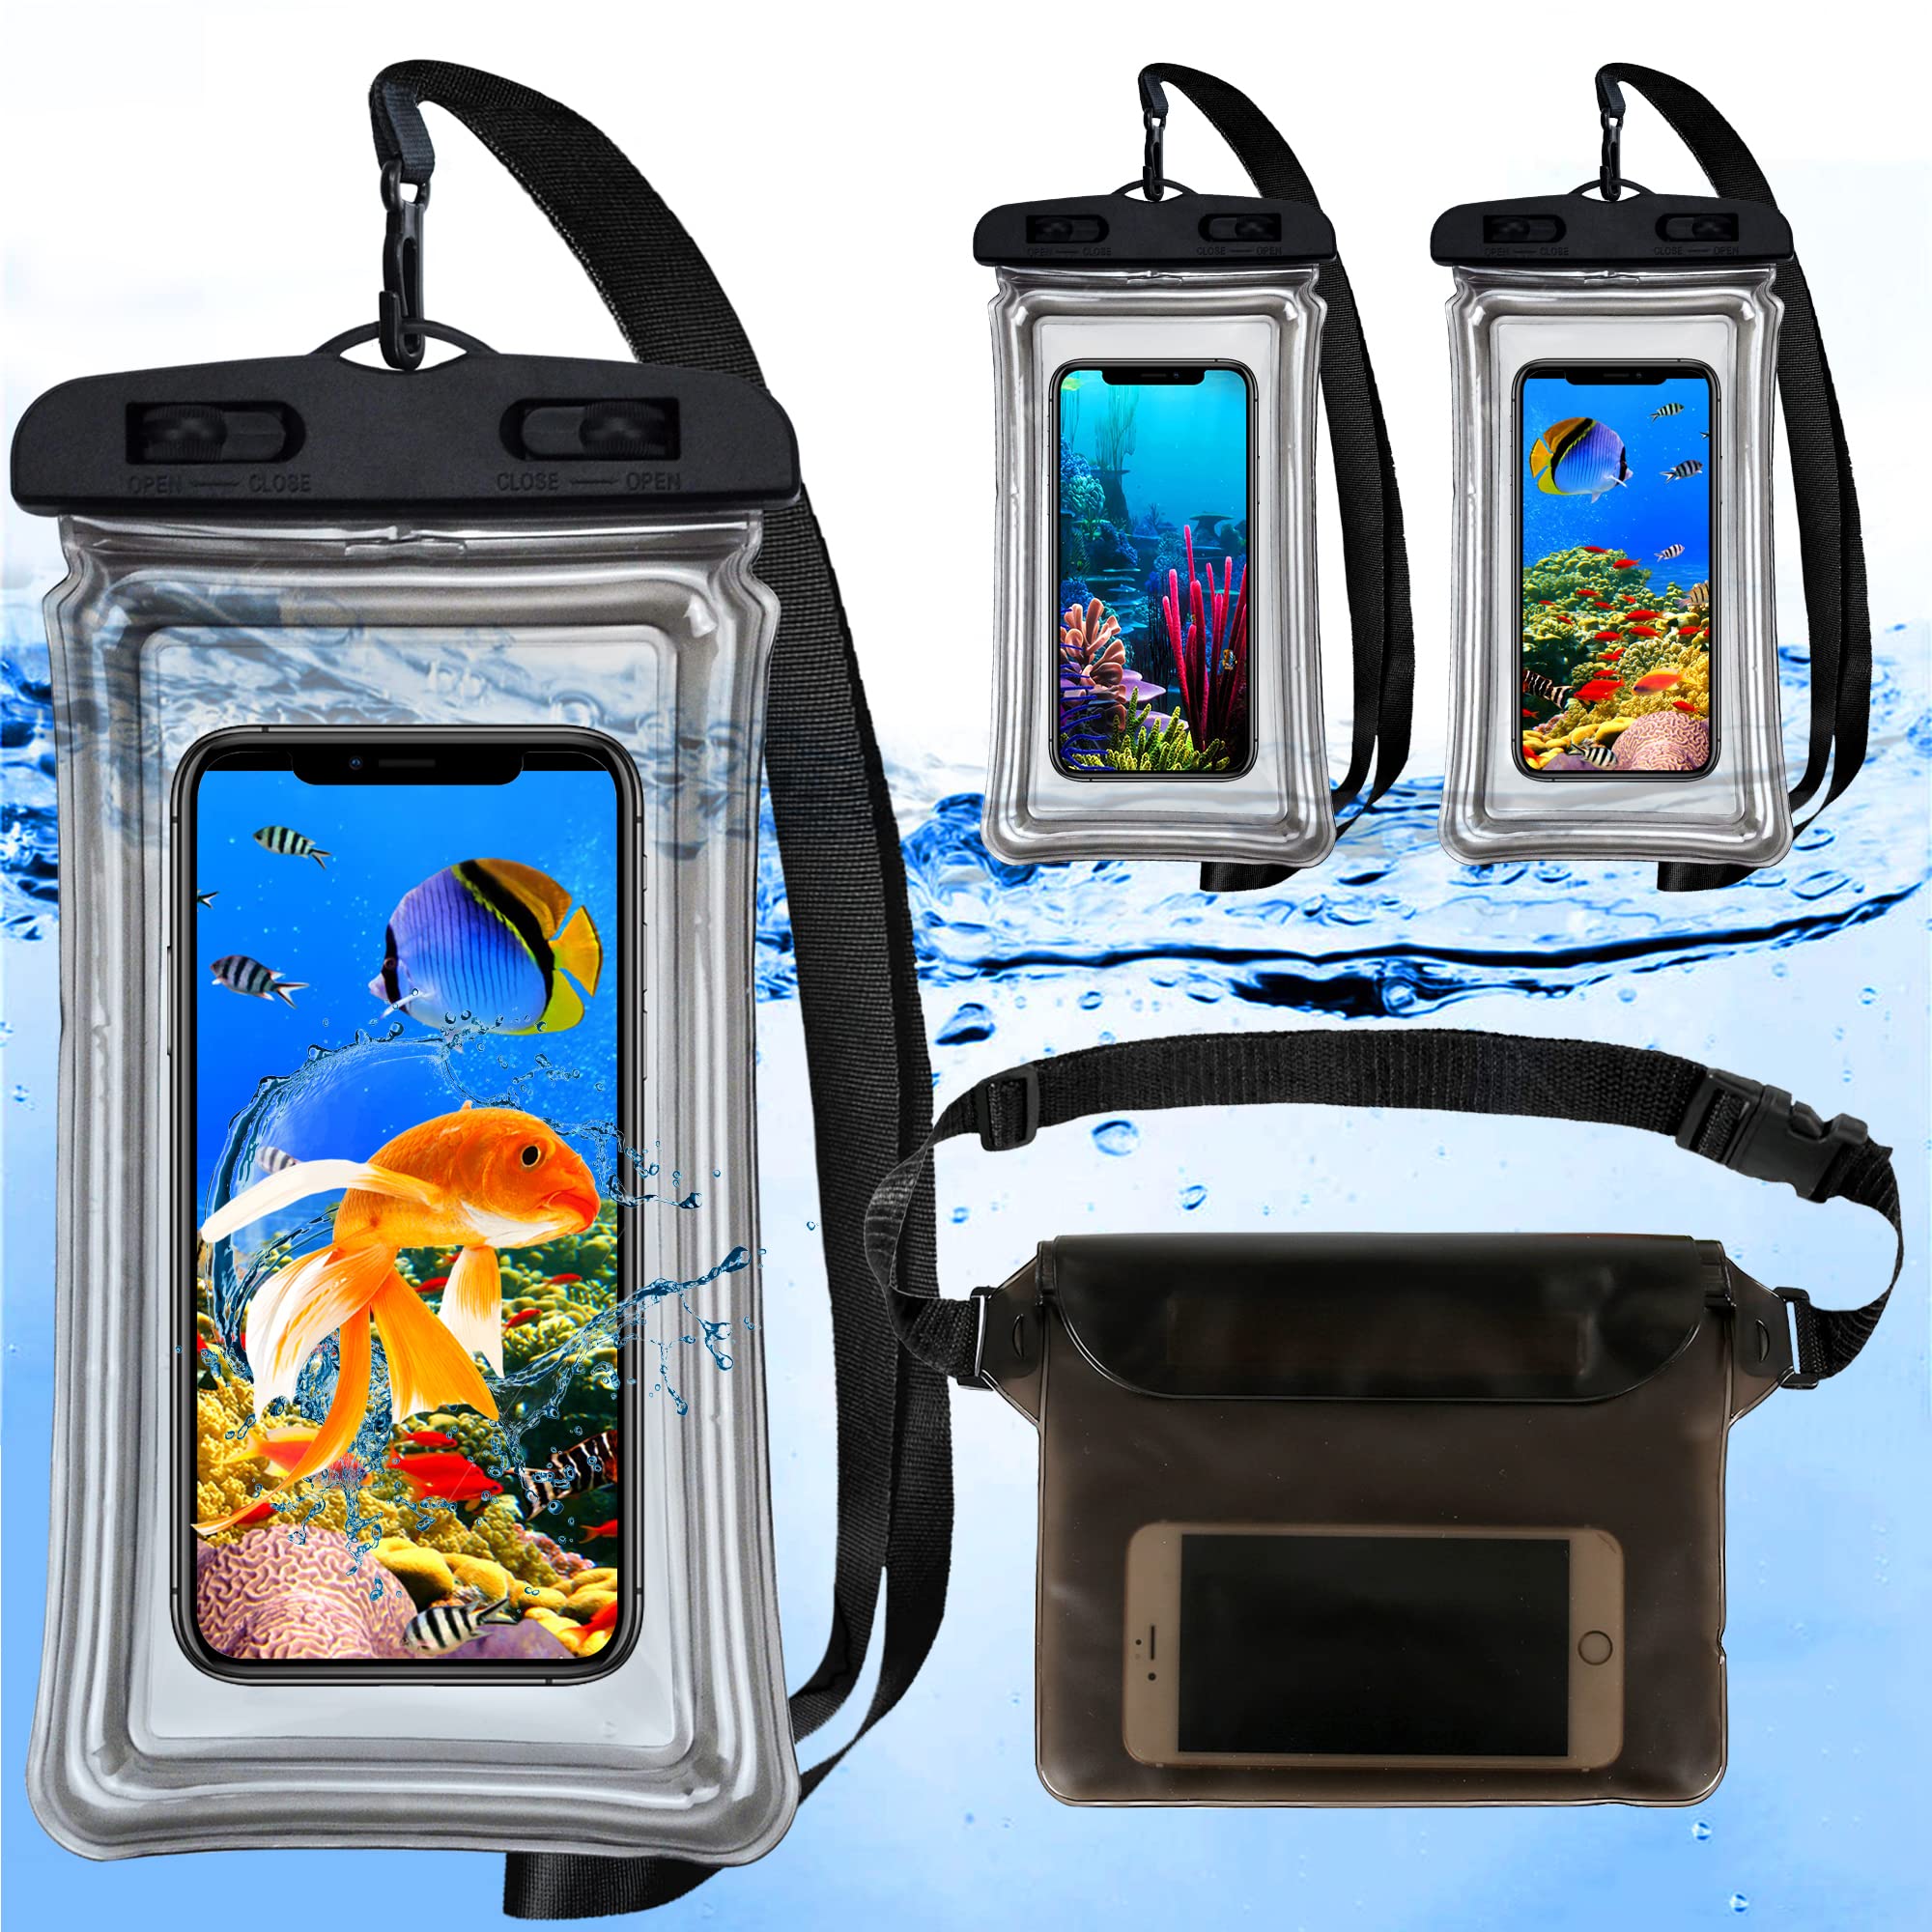 2 Pack Waterproof Phone Case Underwater Phone Pouch Dry Bag with Adjust Lanyard Transparent Screen and Universal Waterproof Waist Bag for Swimming Snorkeling Beach Camping Fishing